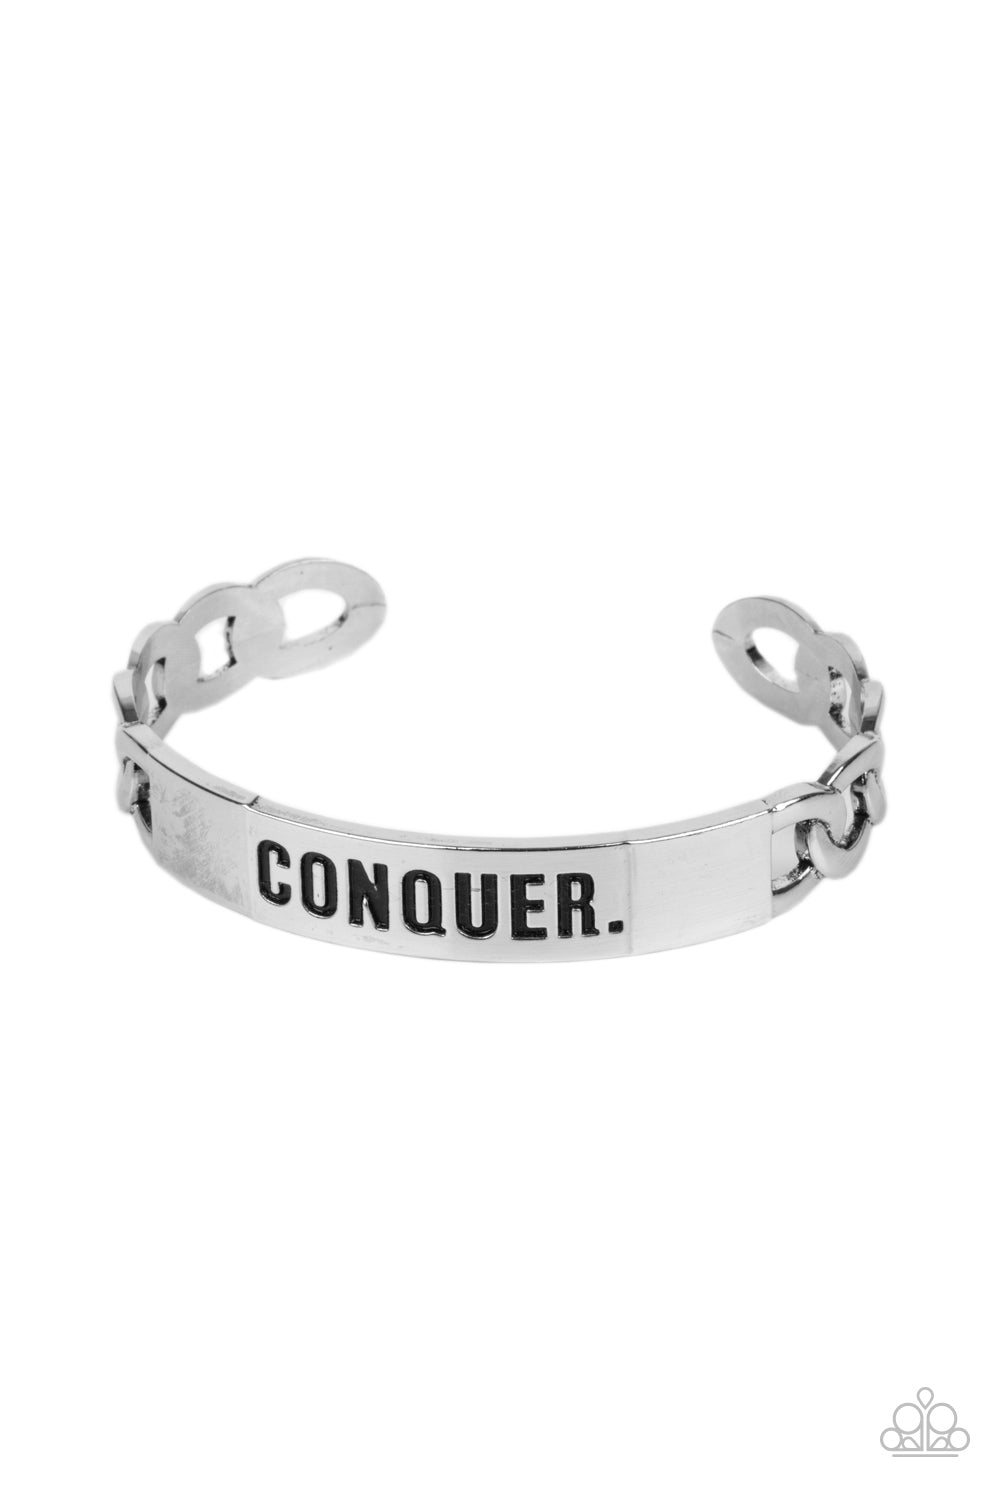 conquer-your-fears-silver-p9mn-ursv-047xx